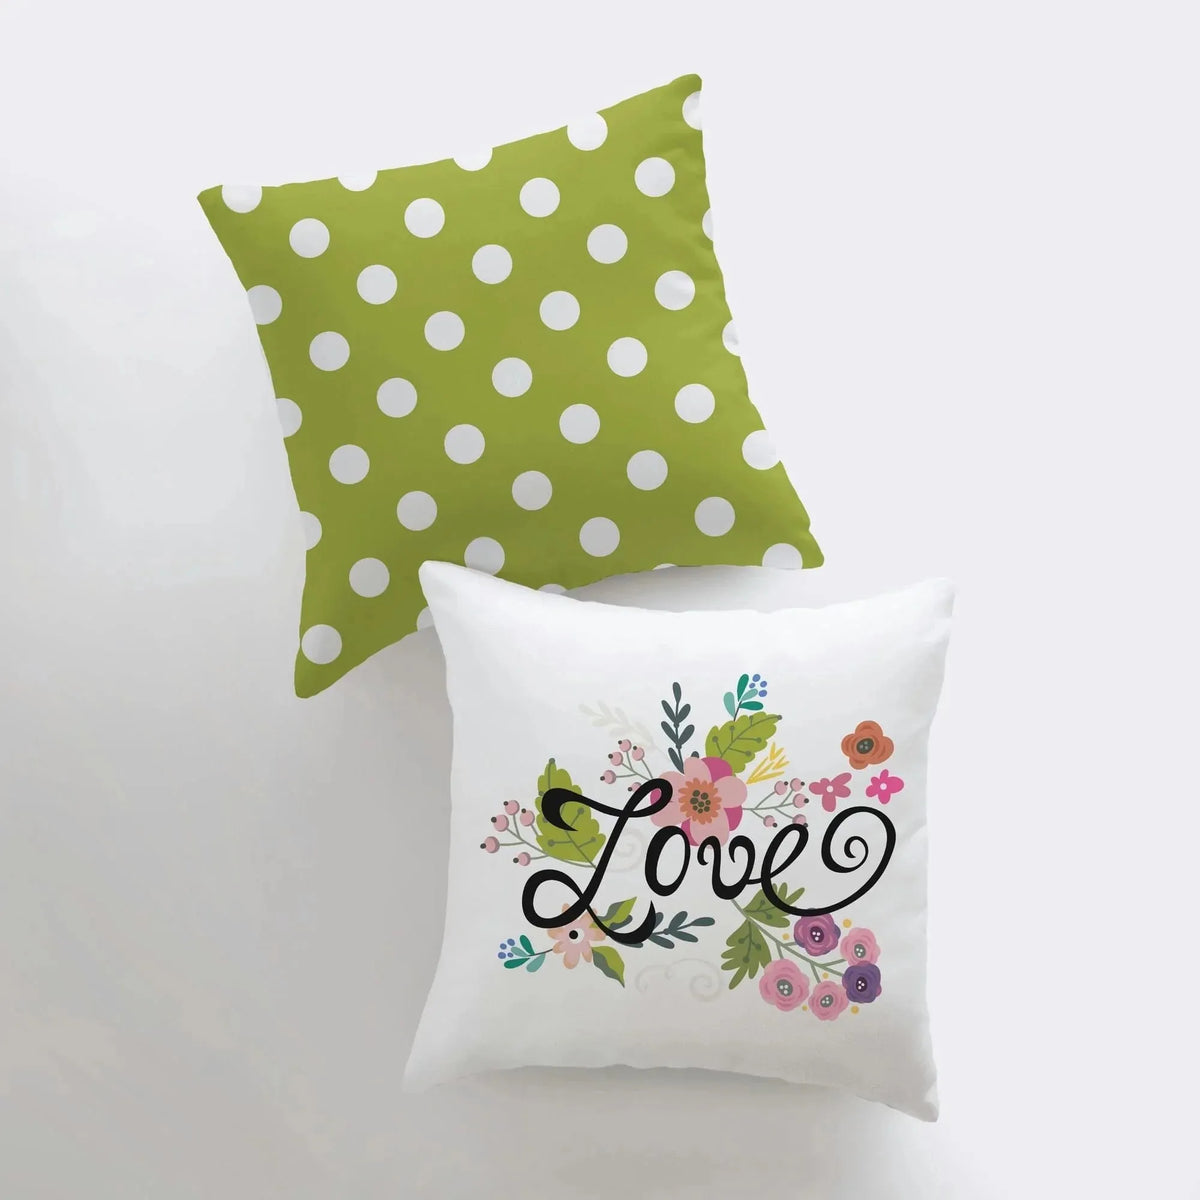 UniikPillows Love Floral Green Polkadot Pillow Cover | Throw Pillow | Home Decor | Rustic Farm | Valentines Decor | I Love You Gift | Valentine Day Decor by UniikPillows